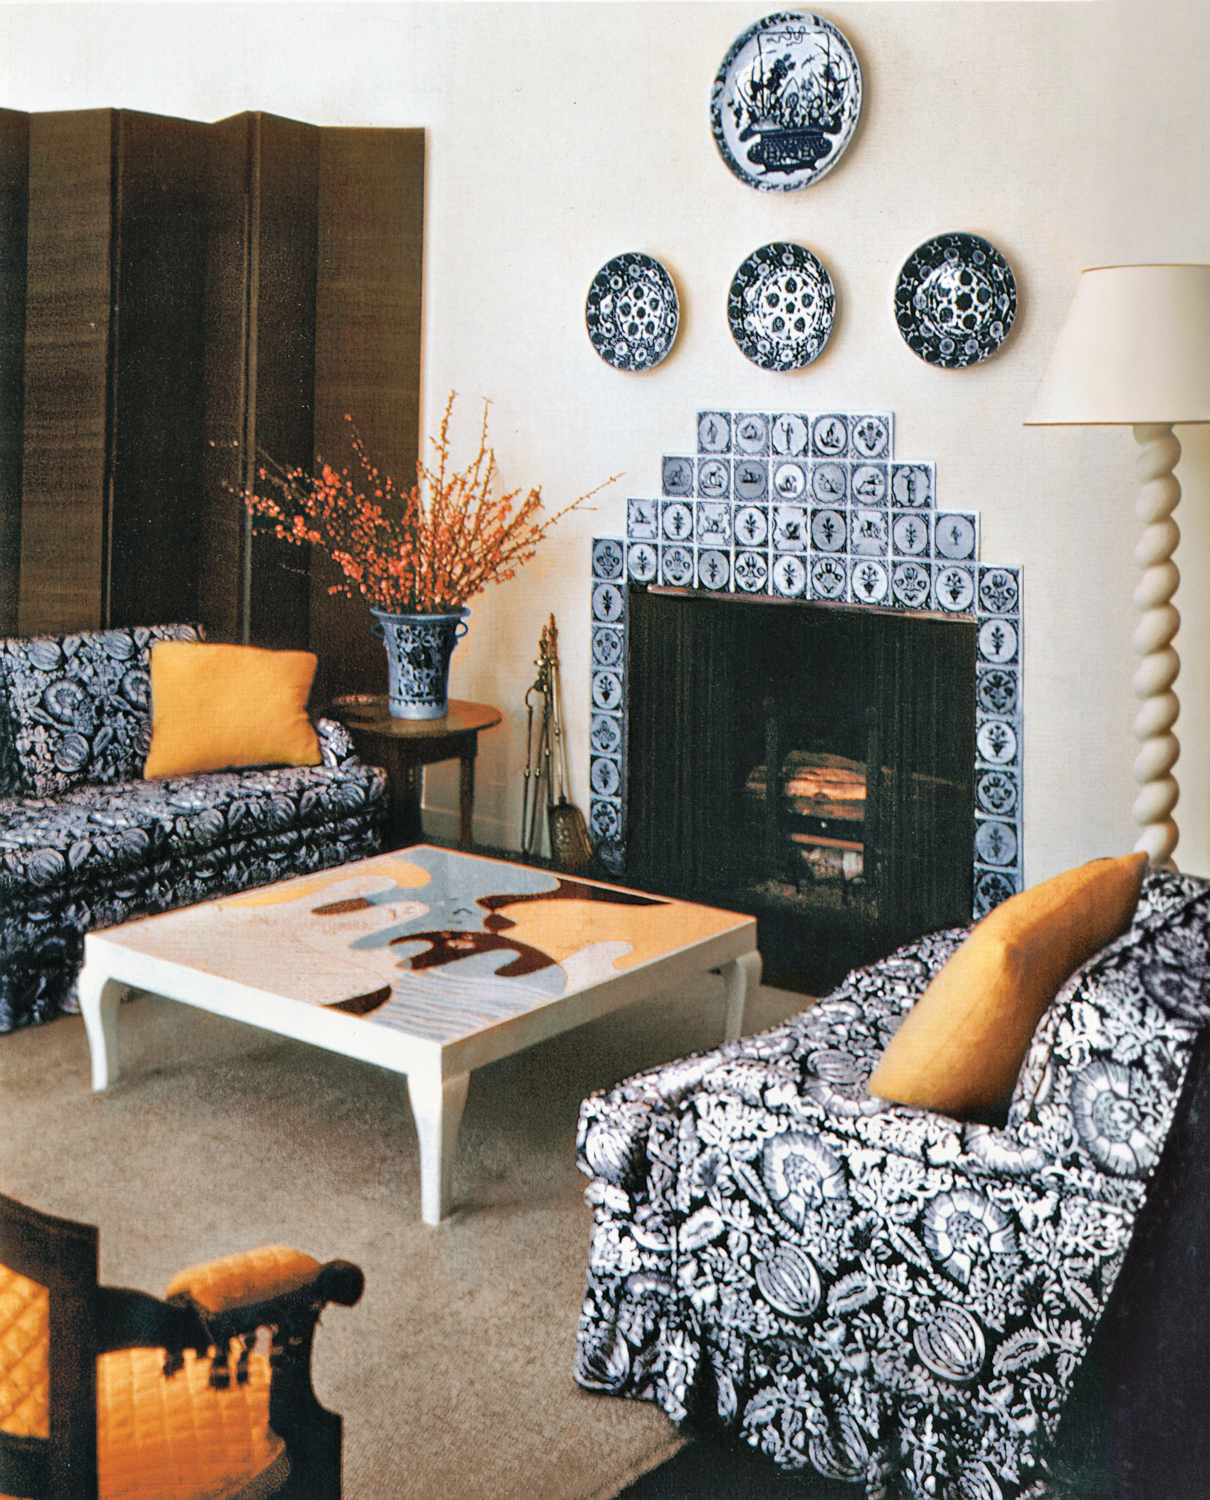 Living room decorated by Frances Elkins with patterned armchairs around a coffee table with an abstract-art motif, facing a patterned fireplace